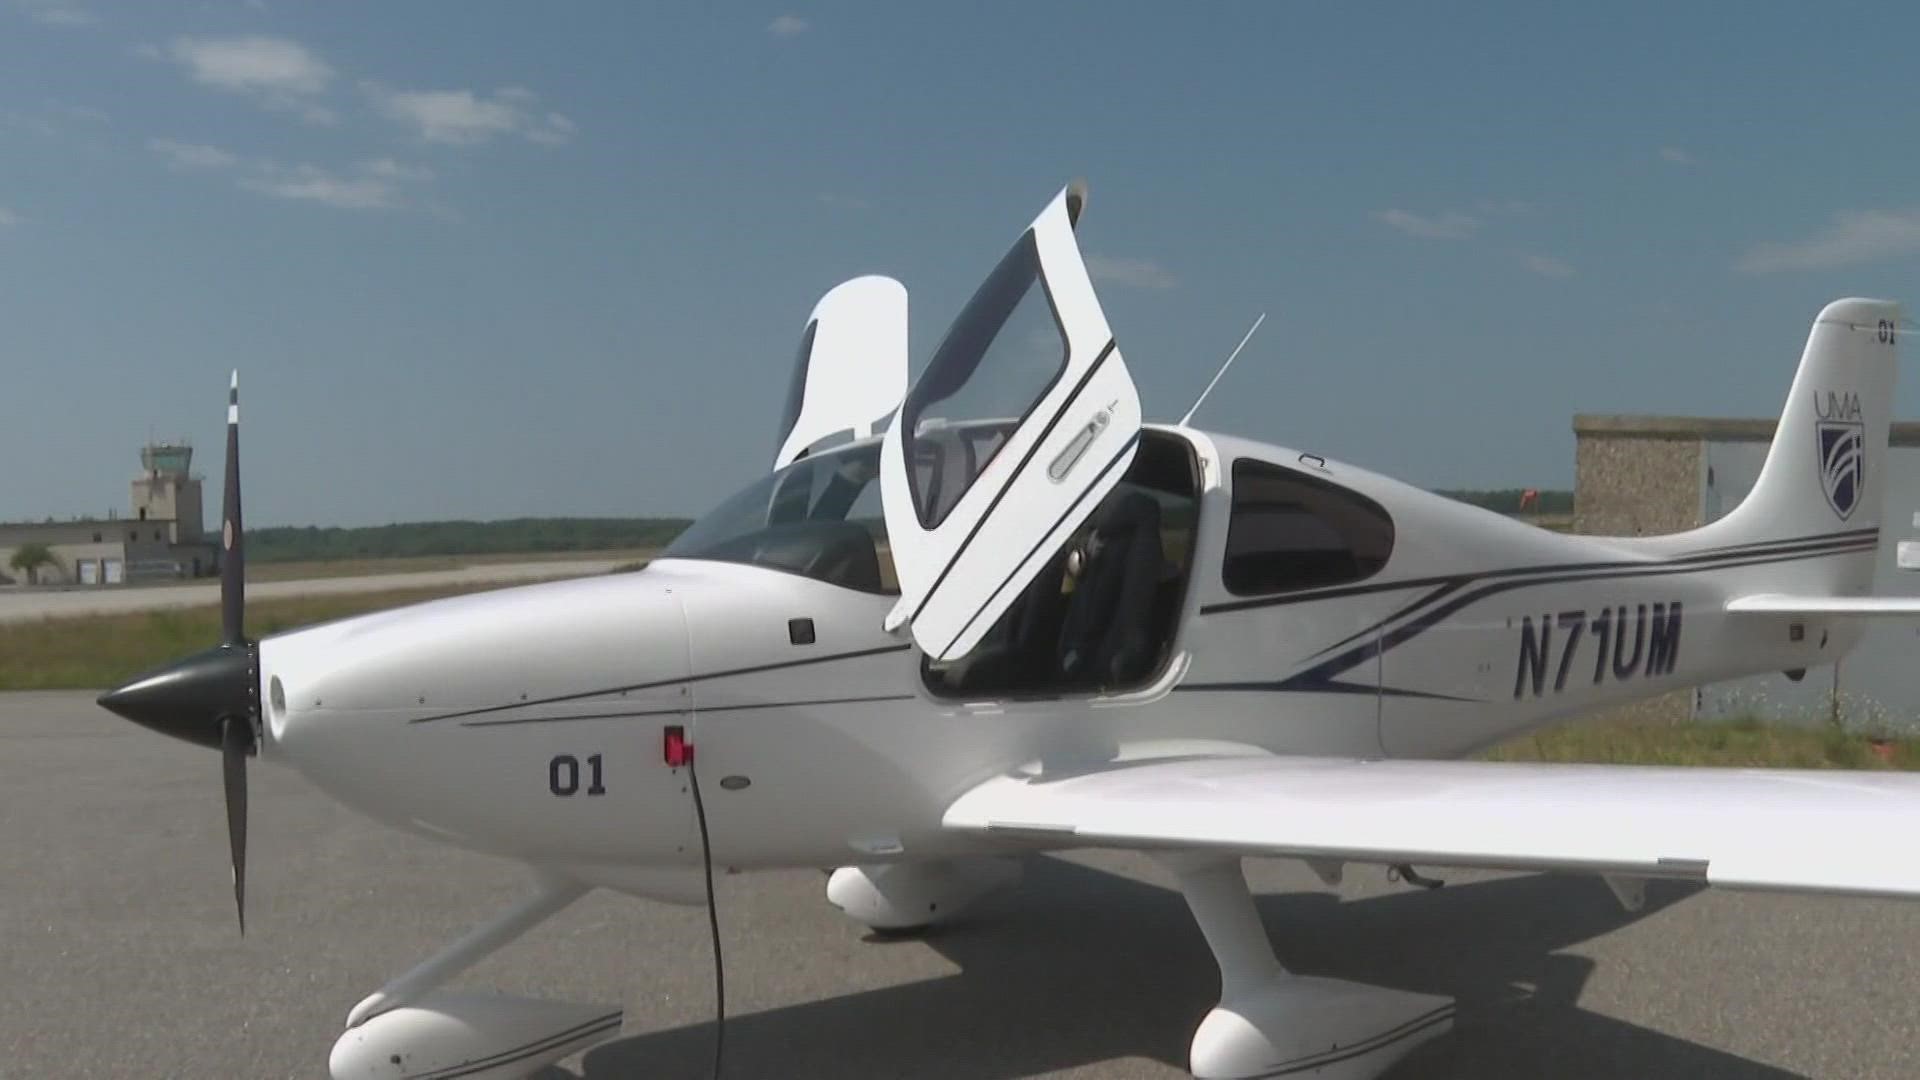 The University of Maine at Augusta unveiled its nearly $500,000 training plane on Wednesday.